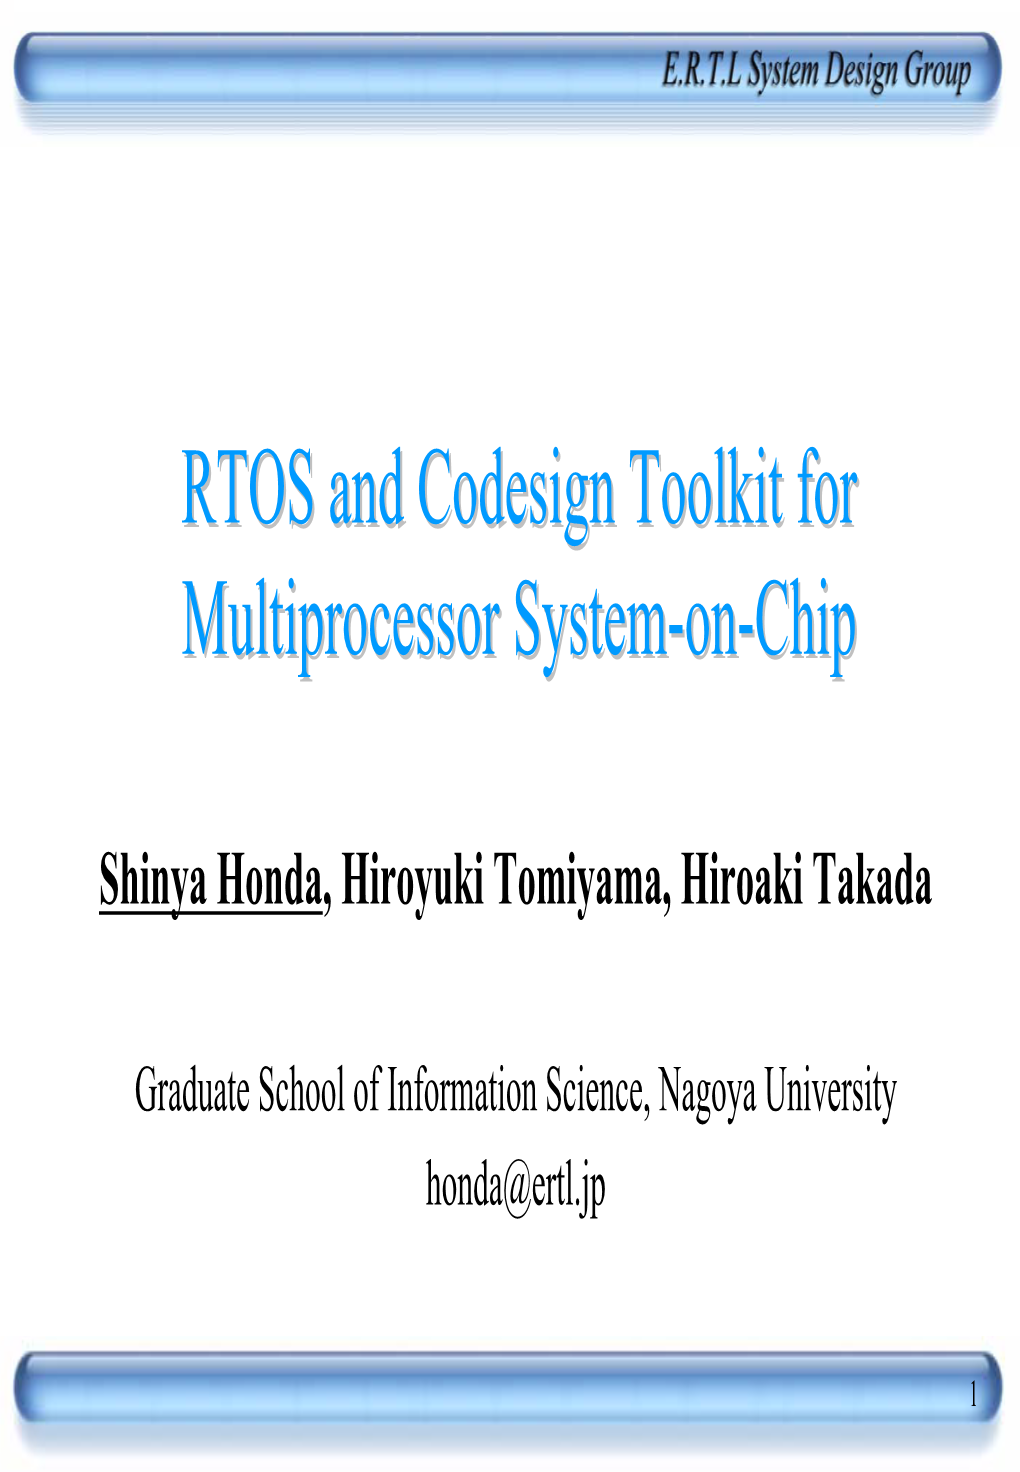 RTOS and Codesign Toolkit for Multiprocessor System-On-Chip